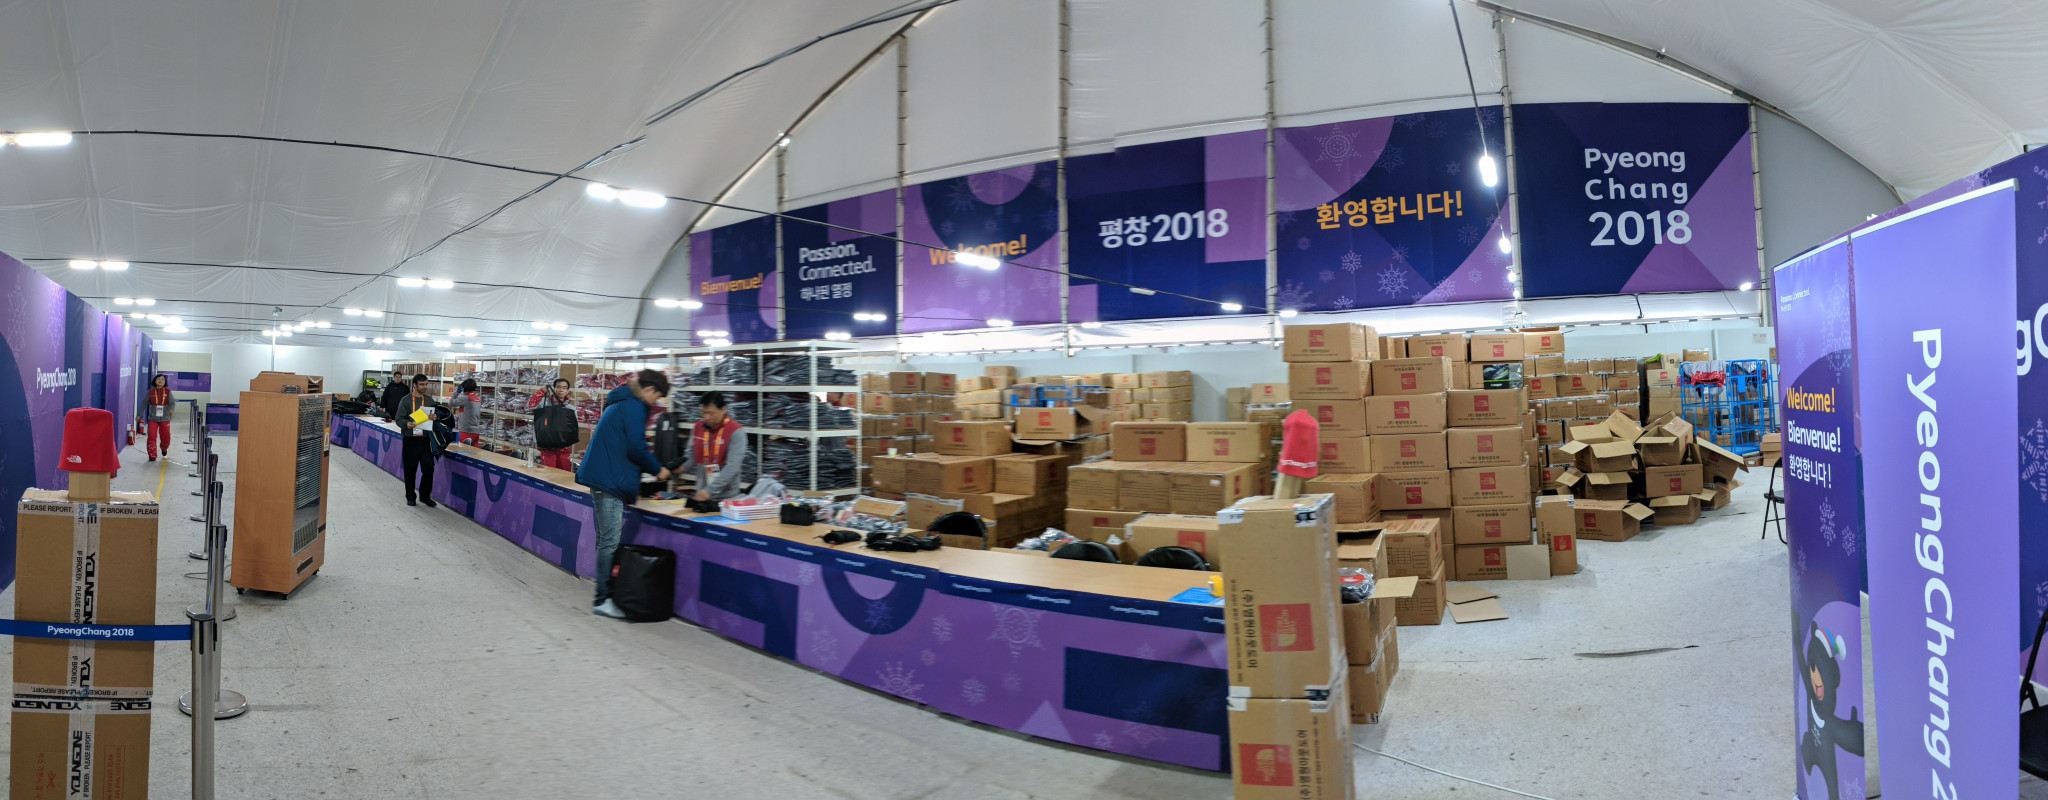 The Uniform and Accreditation Center, located on the site of a former thermal power plant, will be where volunteers and staff go to collect their kit and credentials for Beijing 2022 ©Pyeongchang 2018